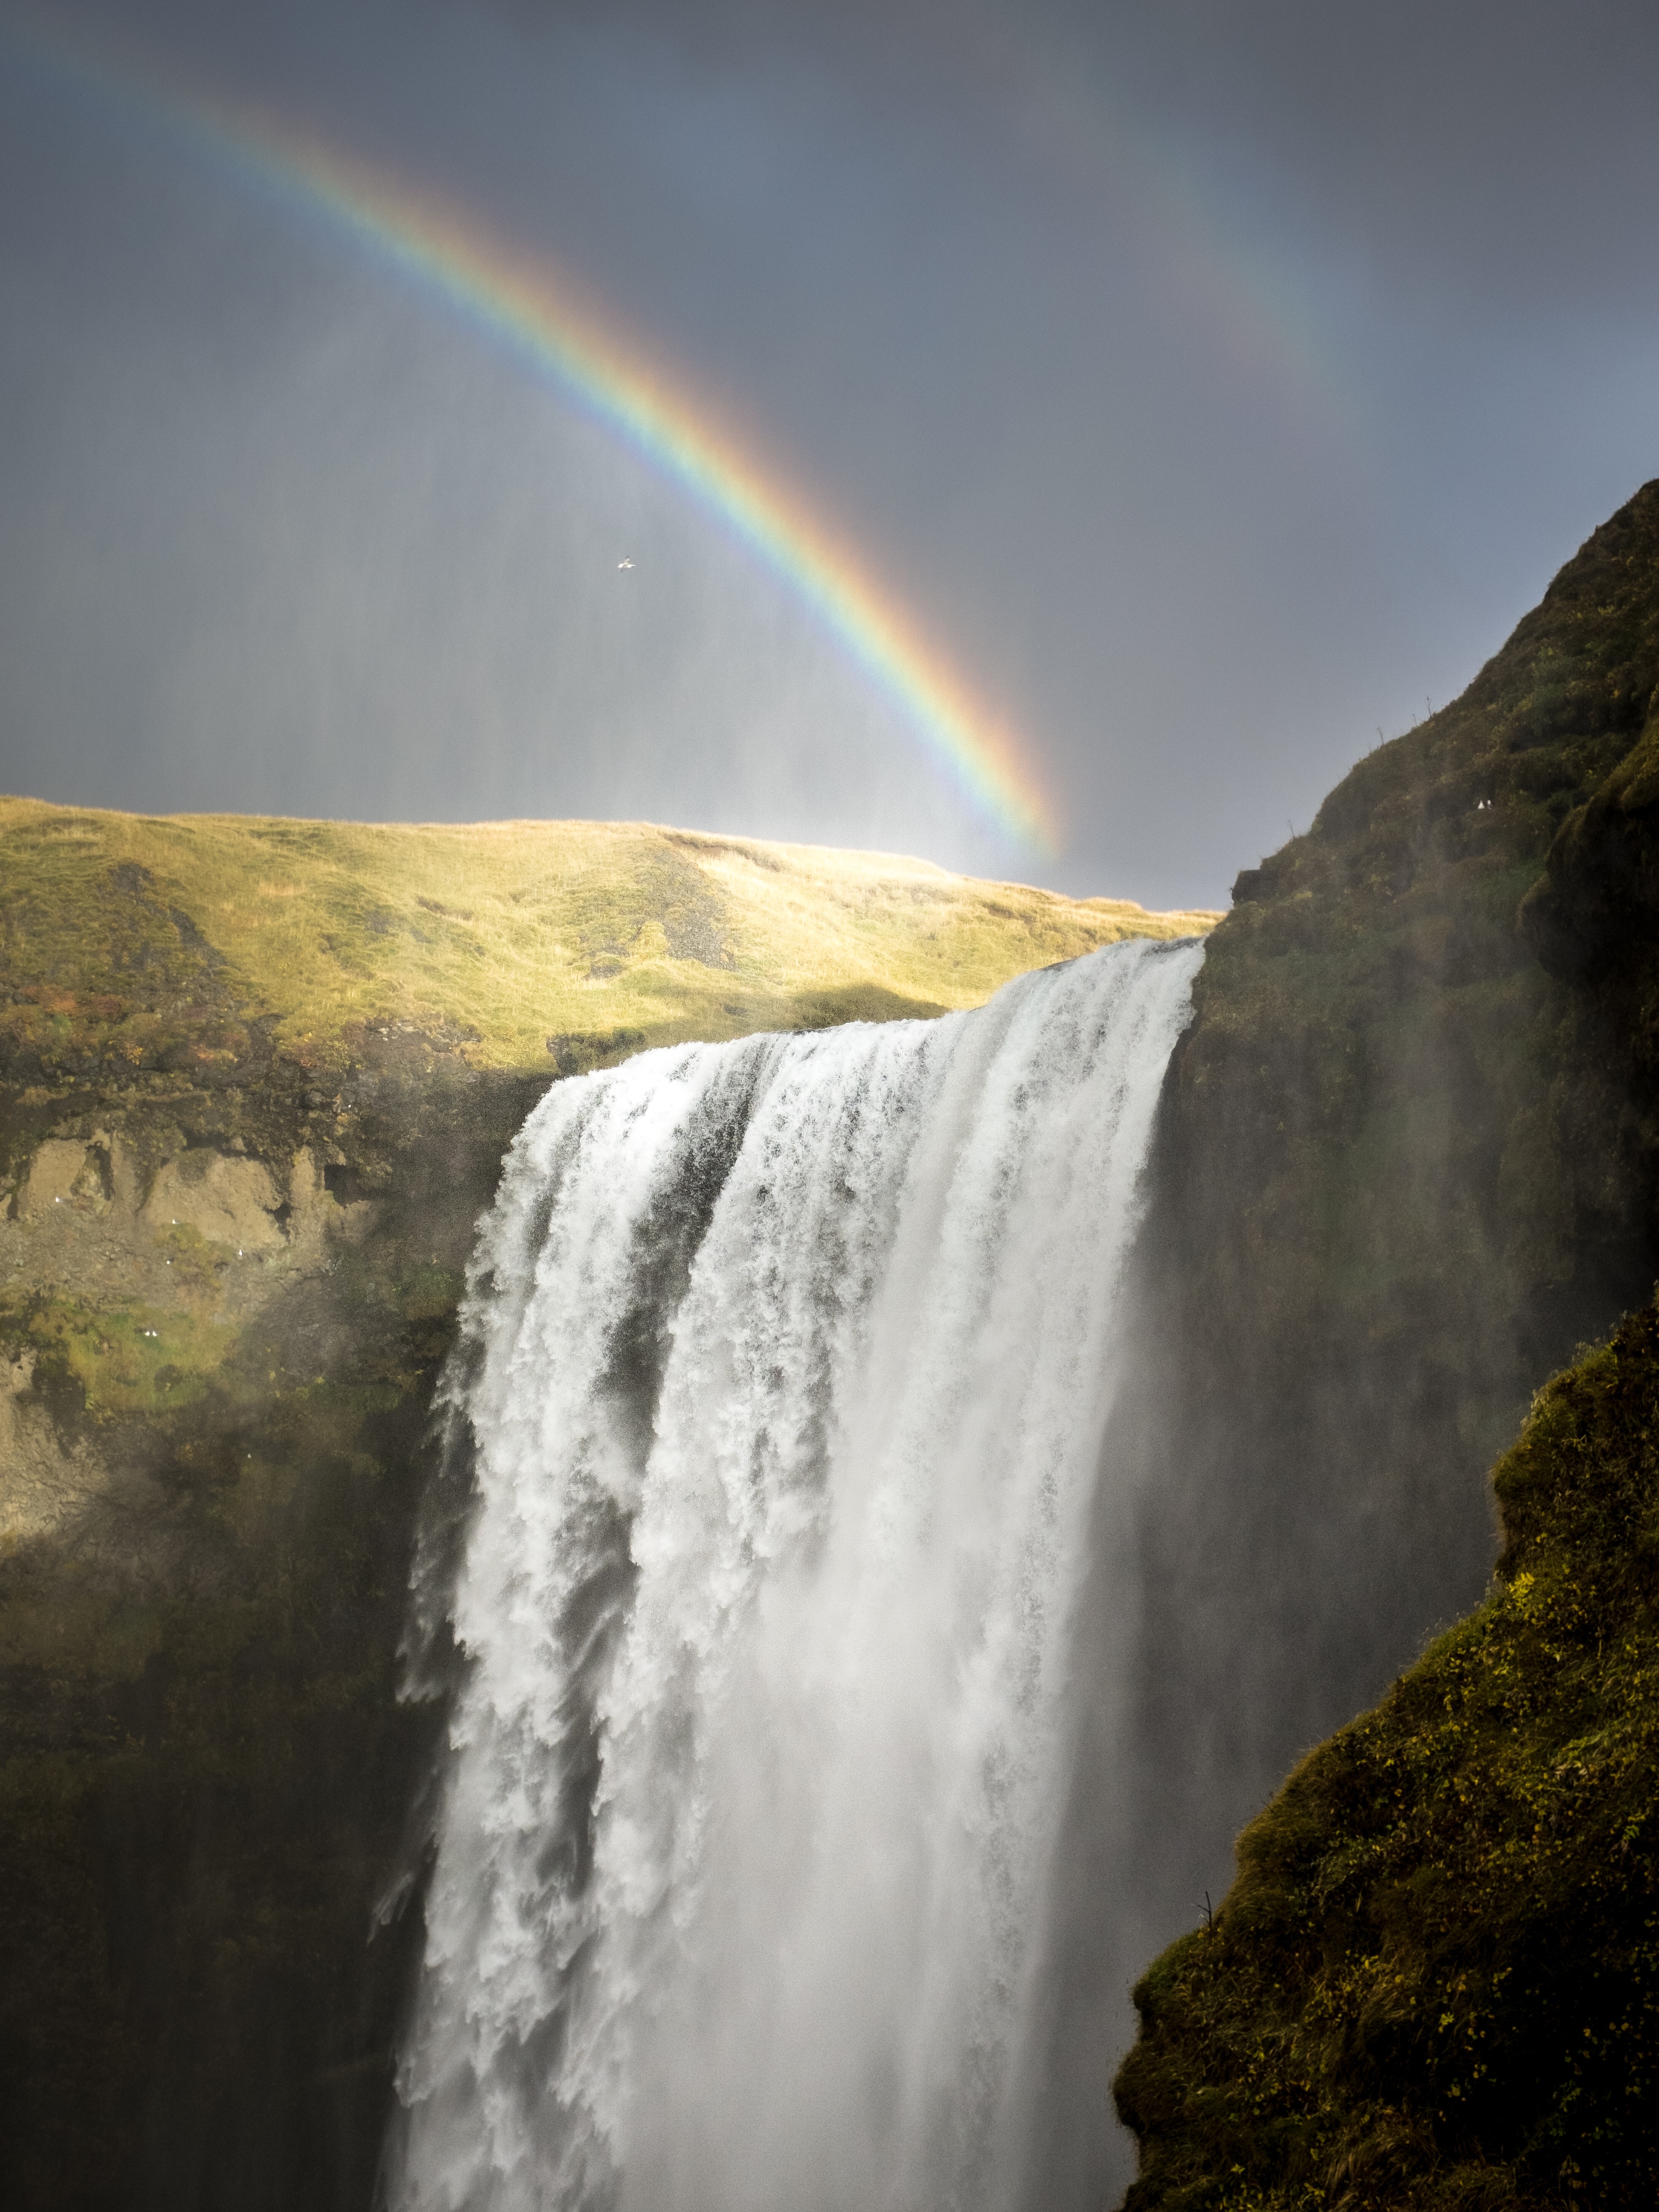 7 Things to See and Do in Iceland. It's one of the most beautiful and mystical places on Earth!